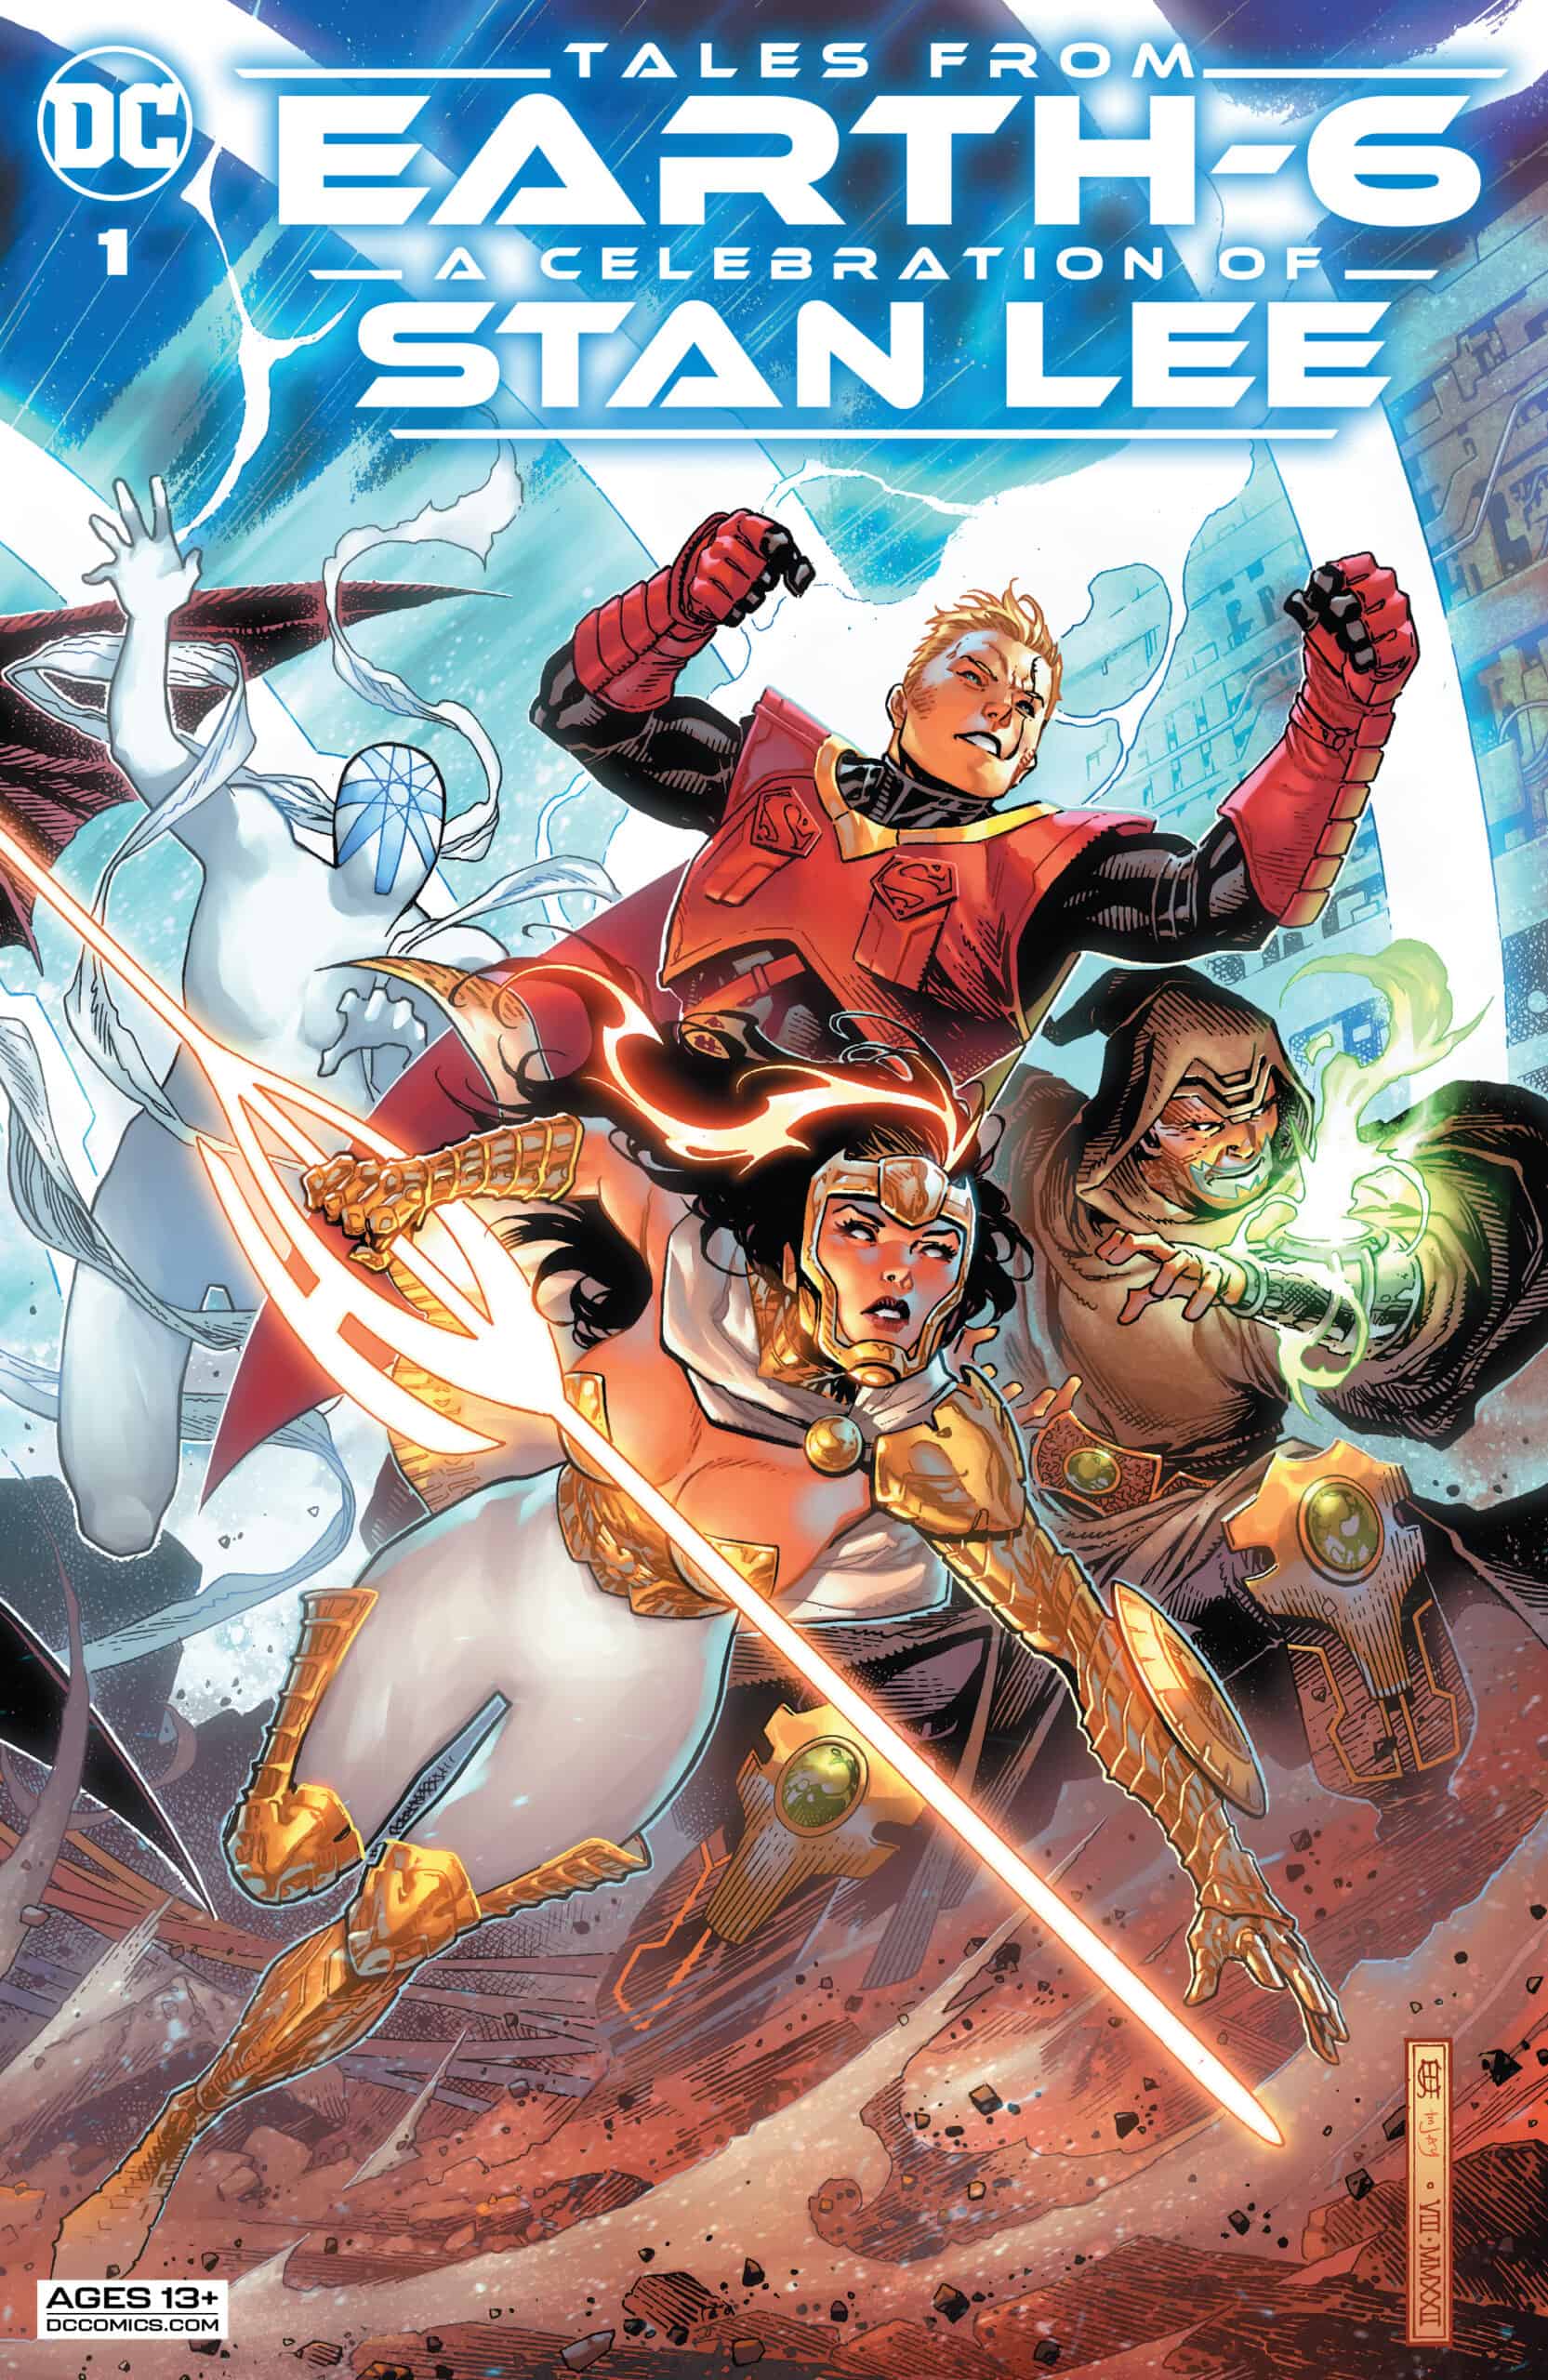 DC COMICS SNEAK PEEK for Dec. 27, 2022: Return to EARTH-6 and the Just  Imagine DCU in TALES FROM EARTH-6: A CELEBRATION OF STAN LEE #1 - Comic  Watch